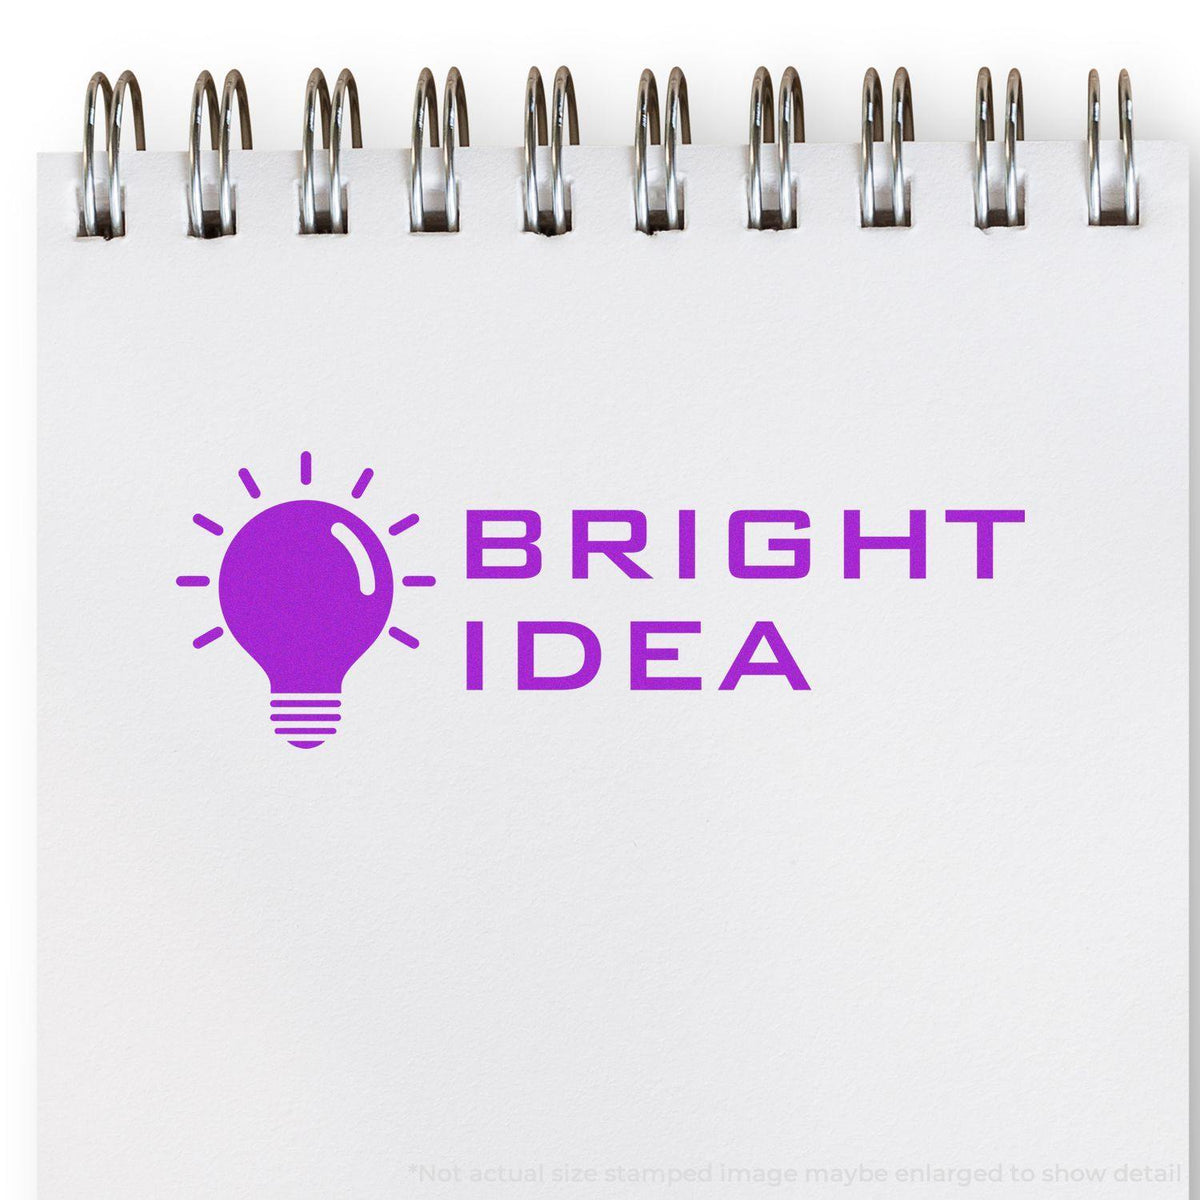 In Use Large Pre-Inked Bright Idea Stamp Image